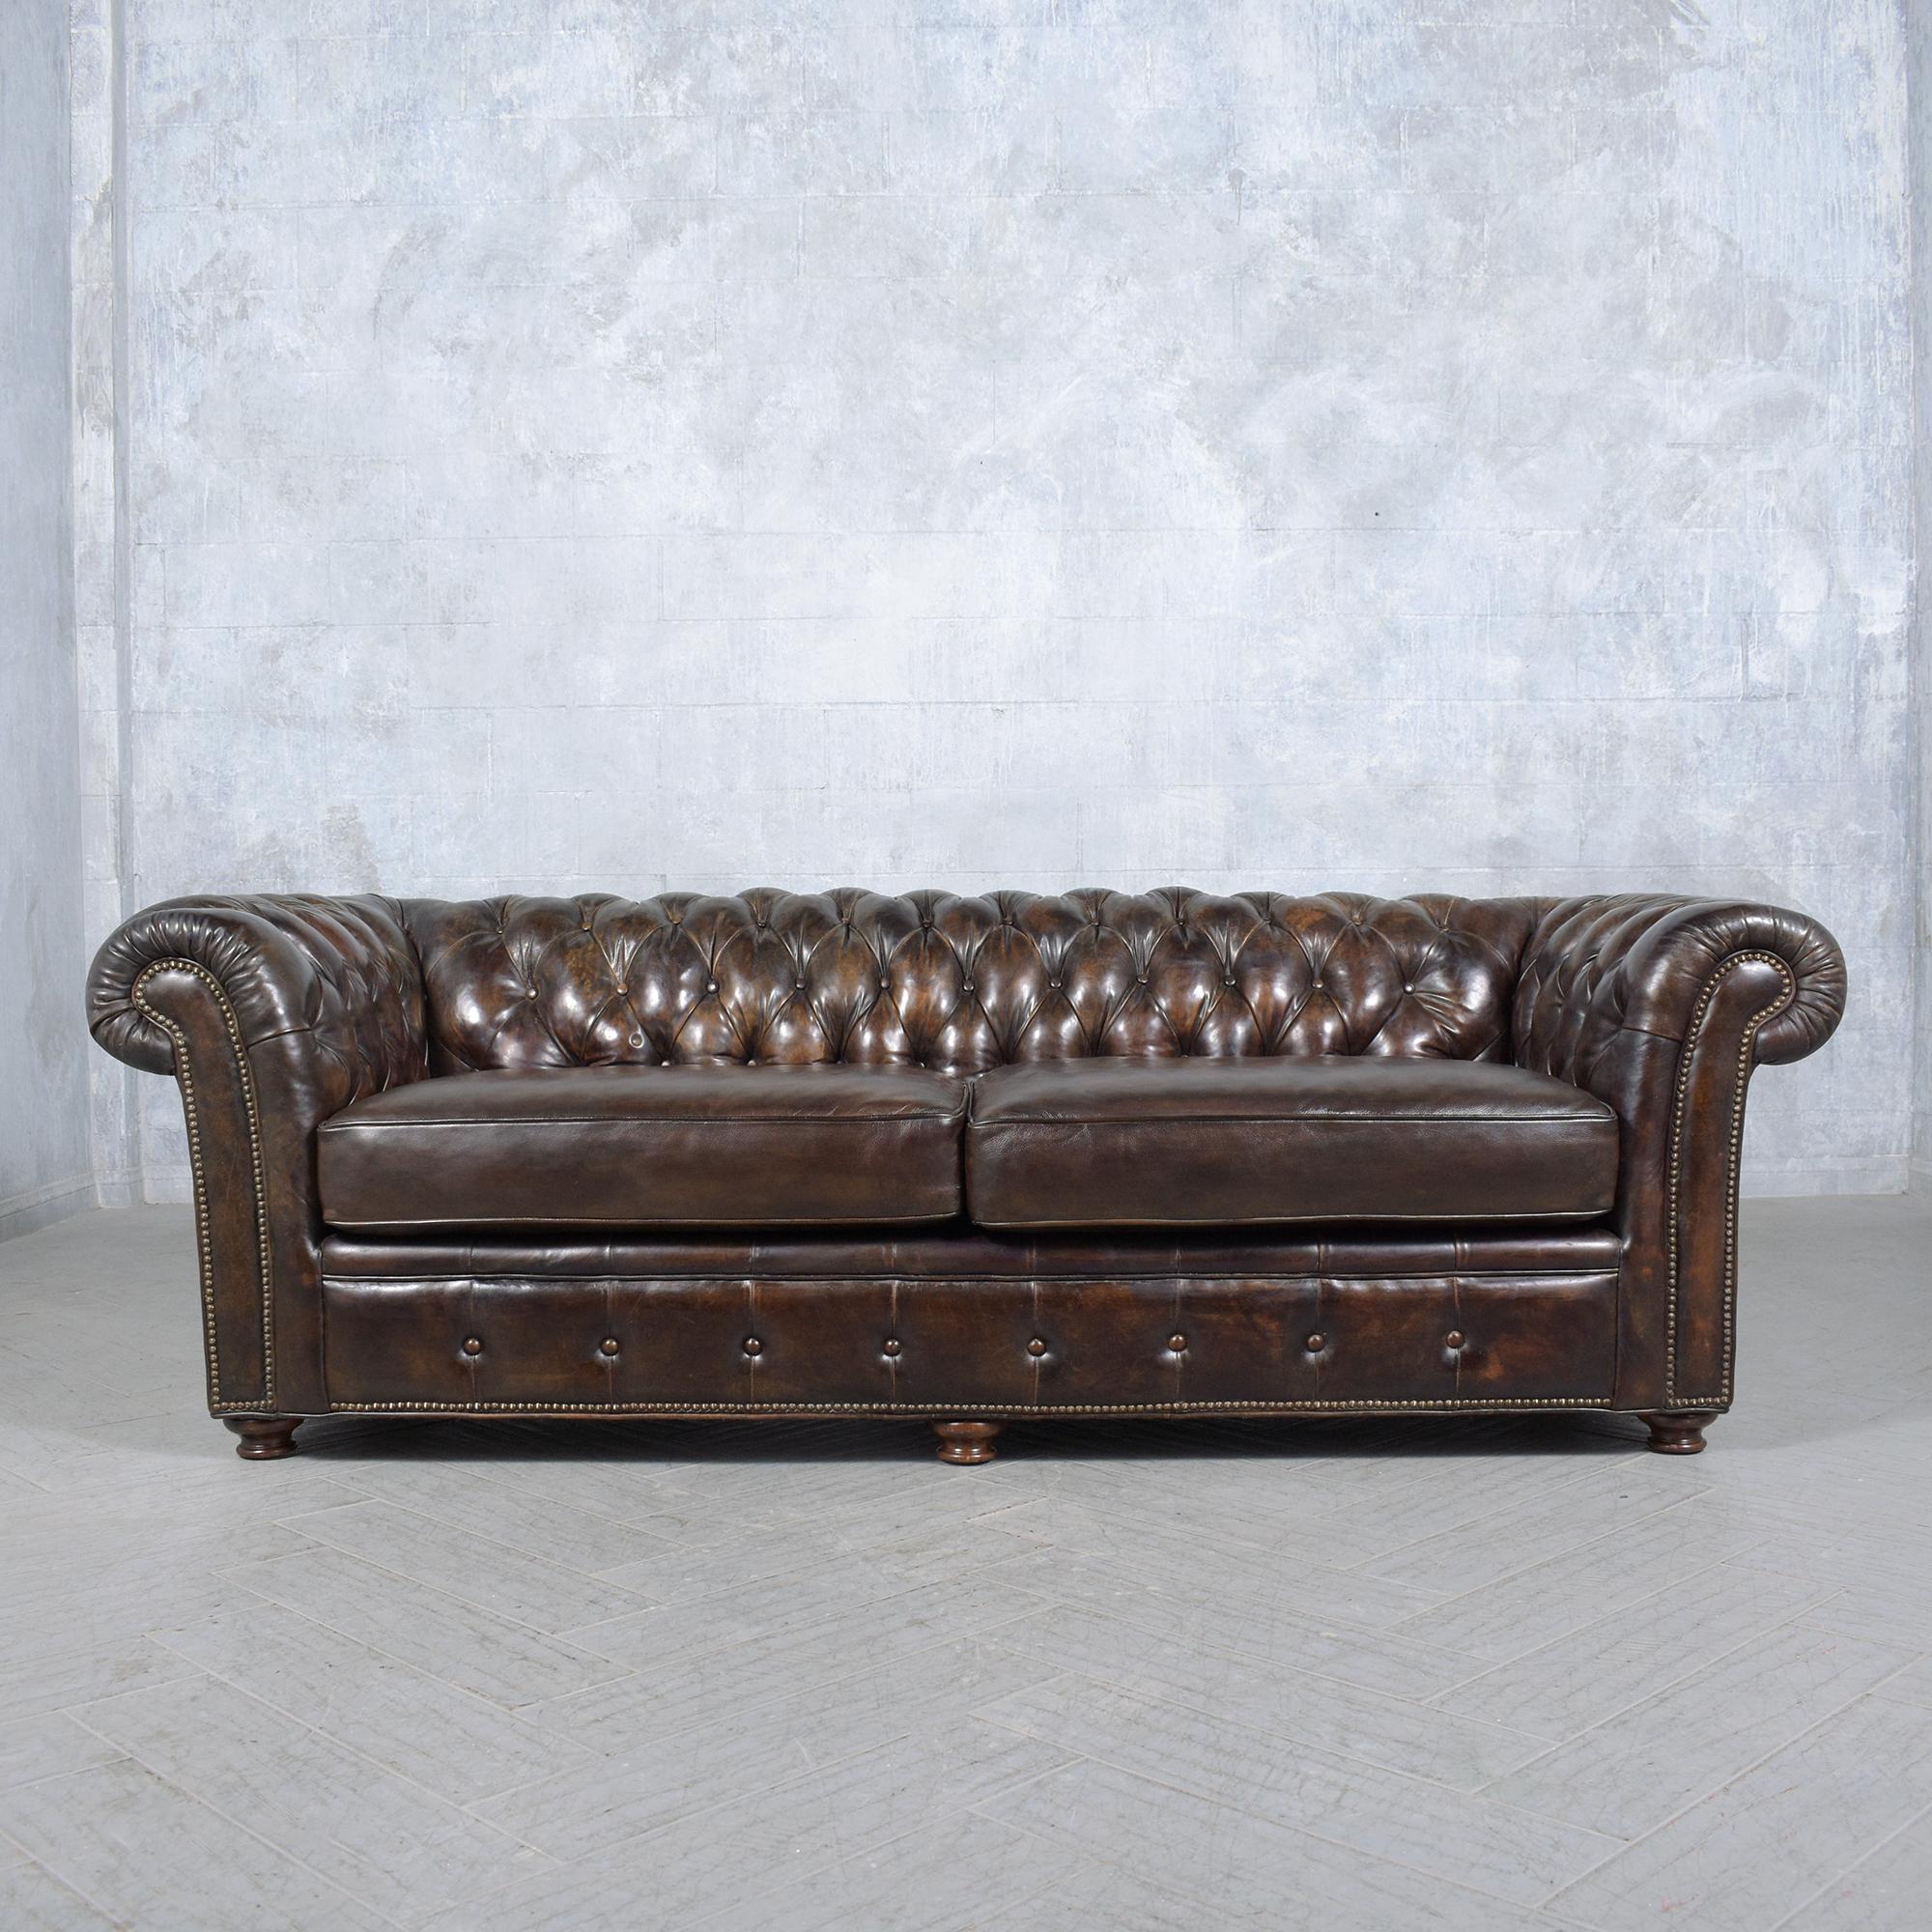 Experience the grandeur of our vintage 1970s Chesterfield sofa, a paragon of classic luxury and meticulous craftsmanship. Hand-crafted from solid wood and sumptuous leather, this sofa has been rejuvenated by our adept craftsmen to showcase a rich